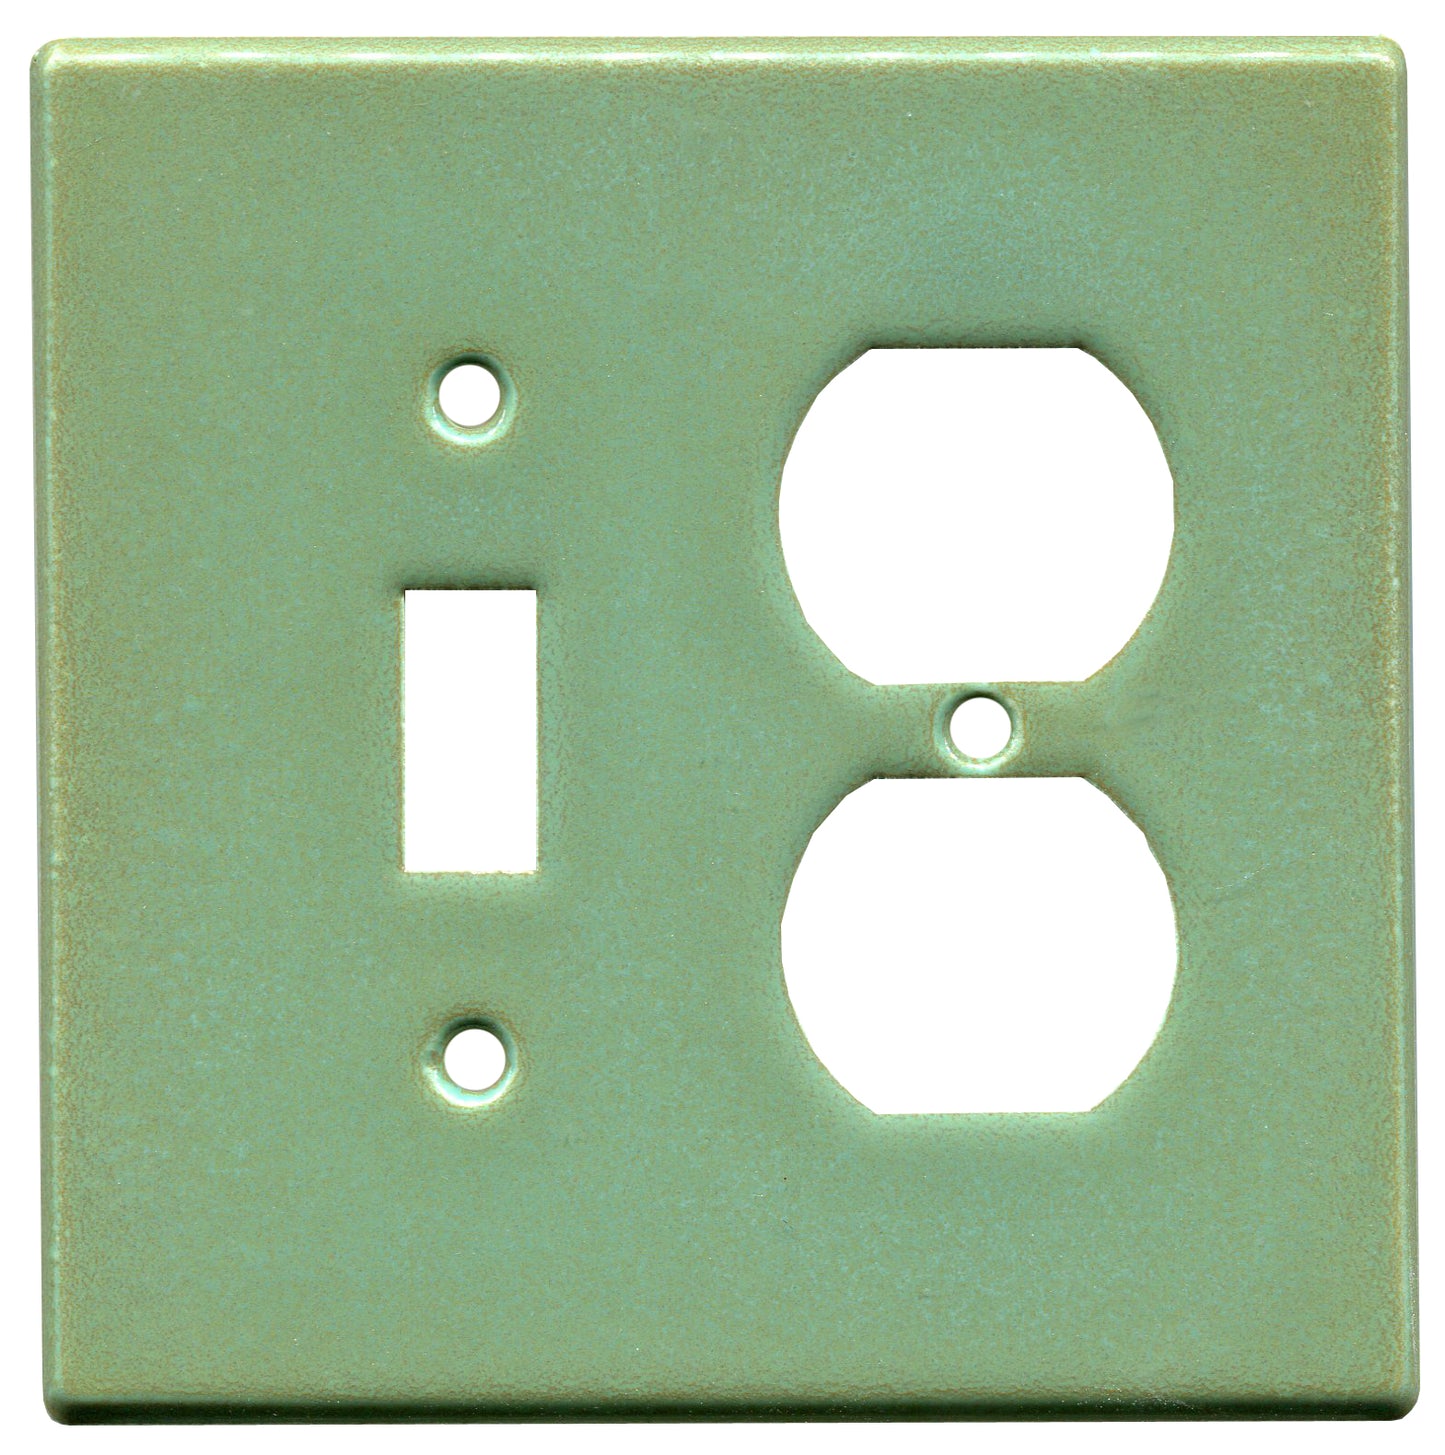 Wasabi switch/outlet combo green ceramic plate